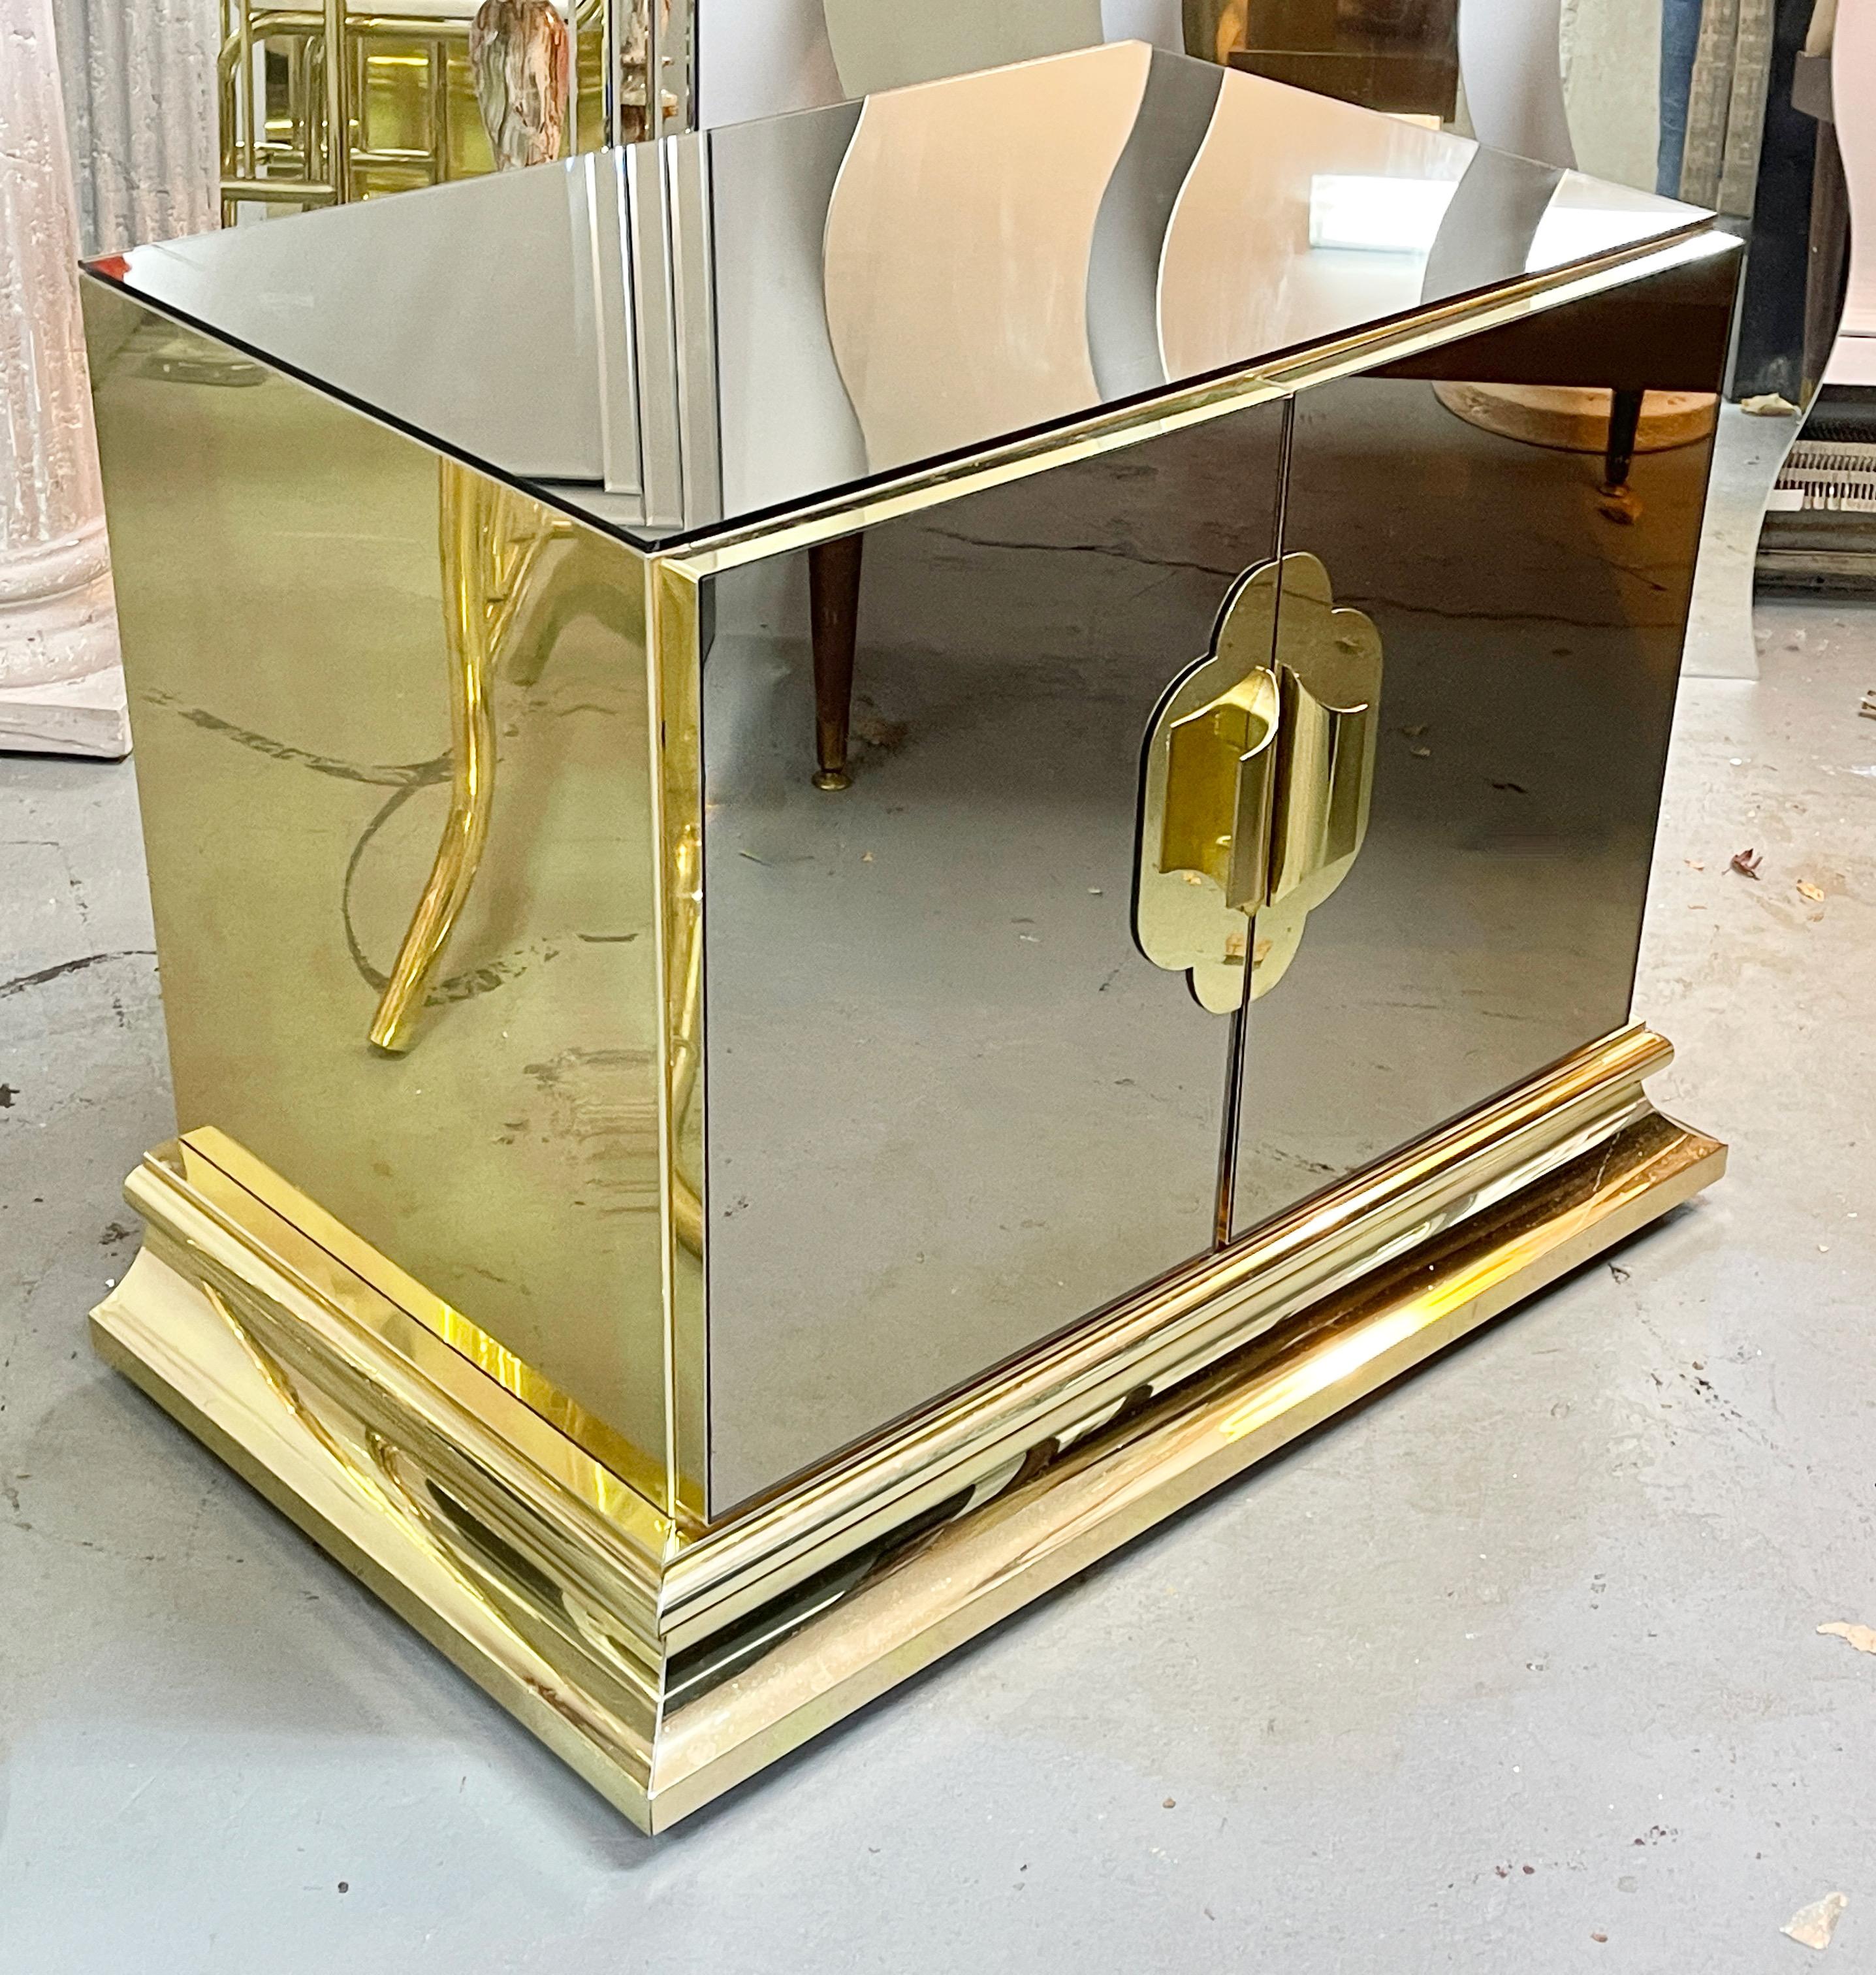 Pair of 1980s bedside cabinets manufactured by Ello Furniture Manufacturing Co. and designed by O. B. Solie as part of Ello's Regency Imperial collection. 
Double door cabinets are clad in bronzed mirrored glass with gilt brass escutcheons and